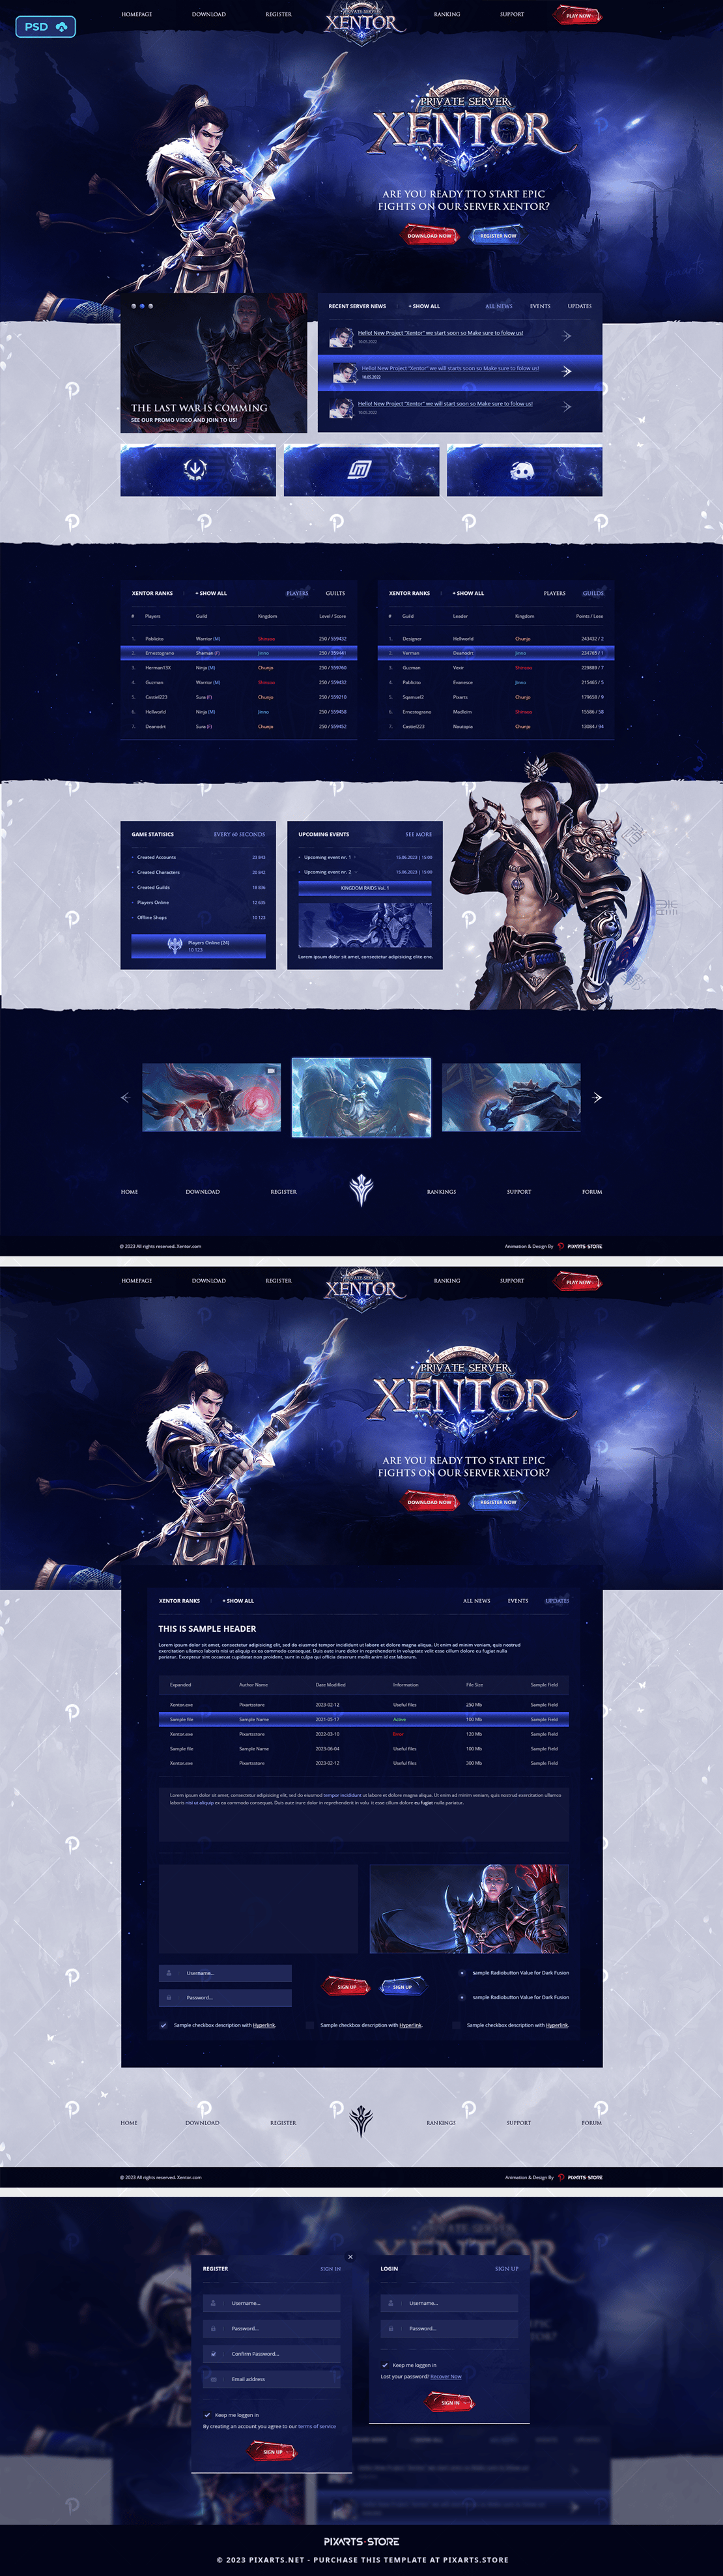 Metin2 Private Server Game Website Template - Xentor